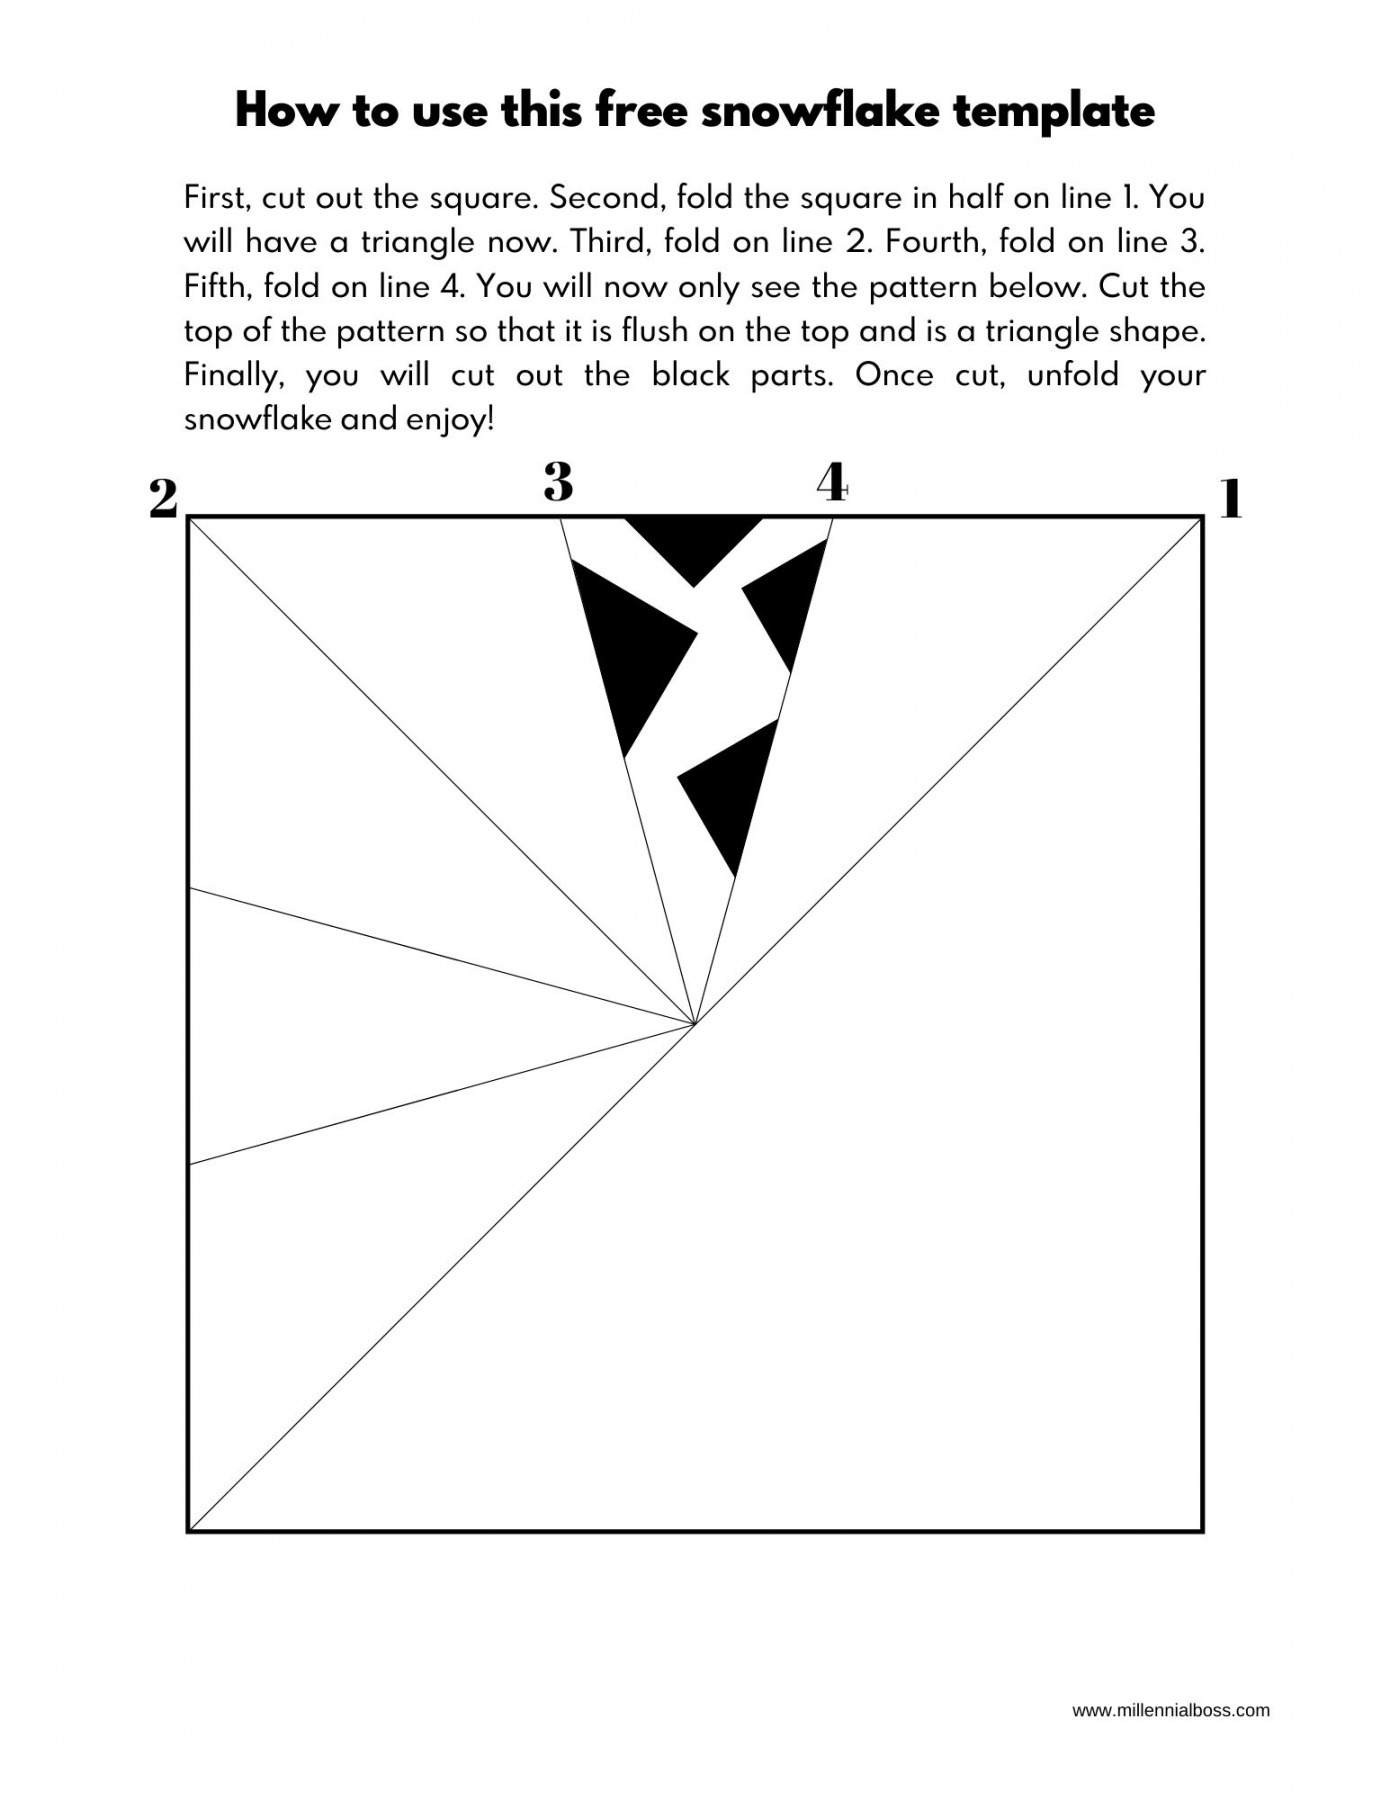 Free Snowflake Templates easy, quick and cute FREE PDF - FREE Printables - Free Snowflake Template Pdf